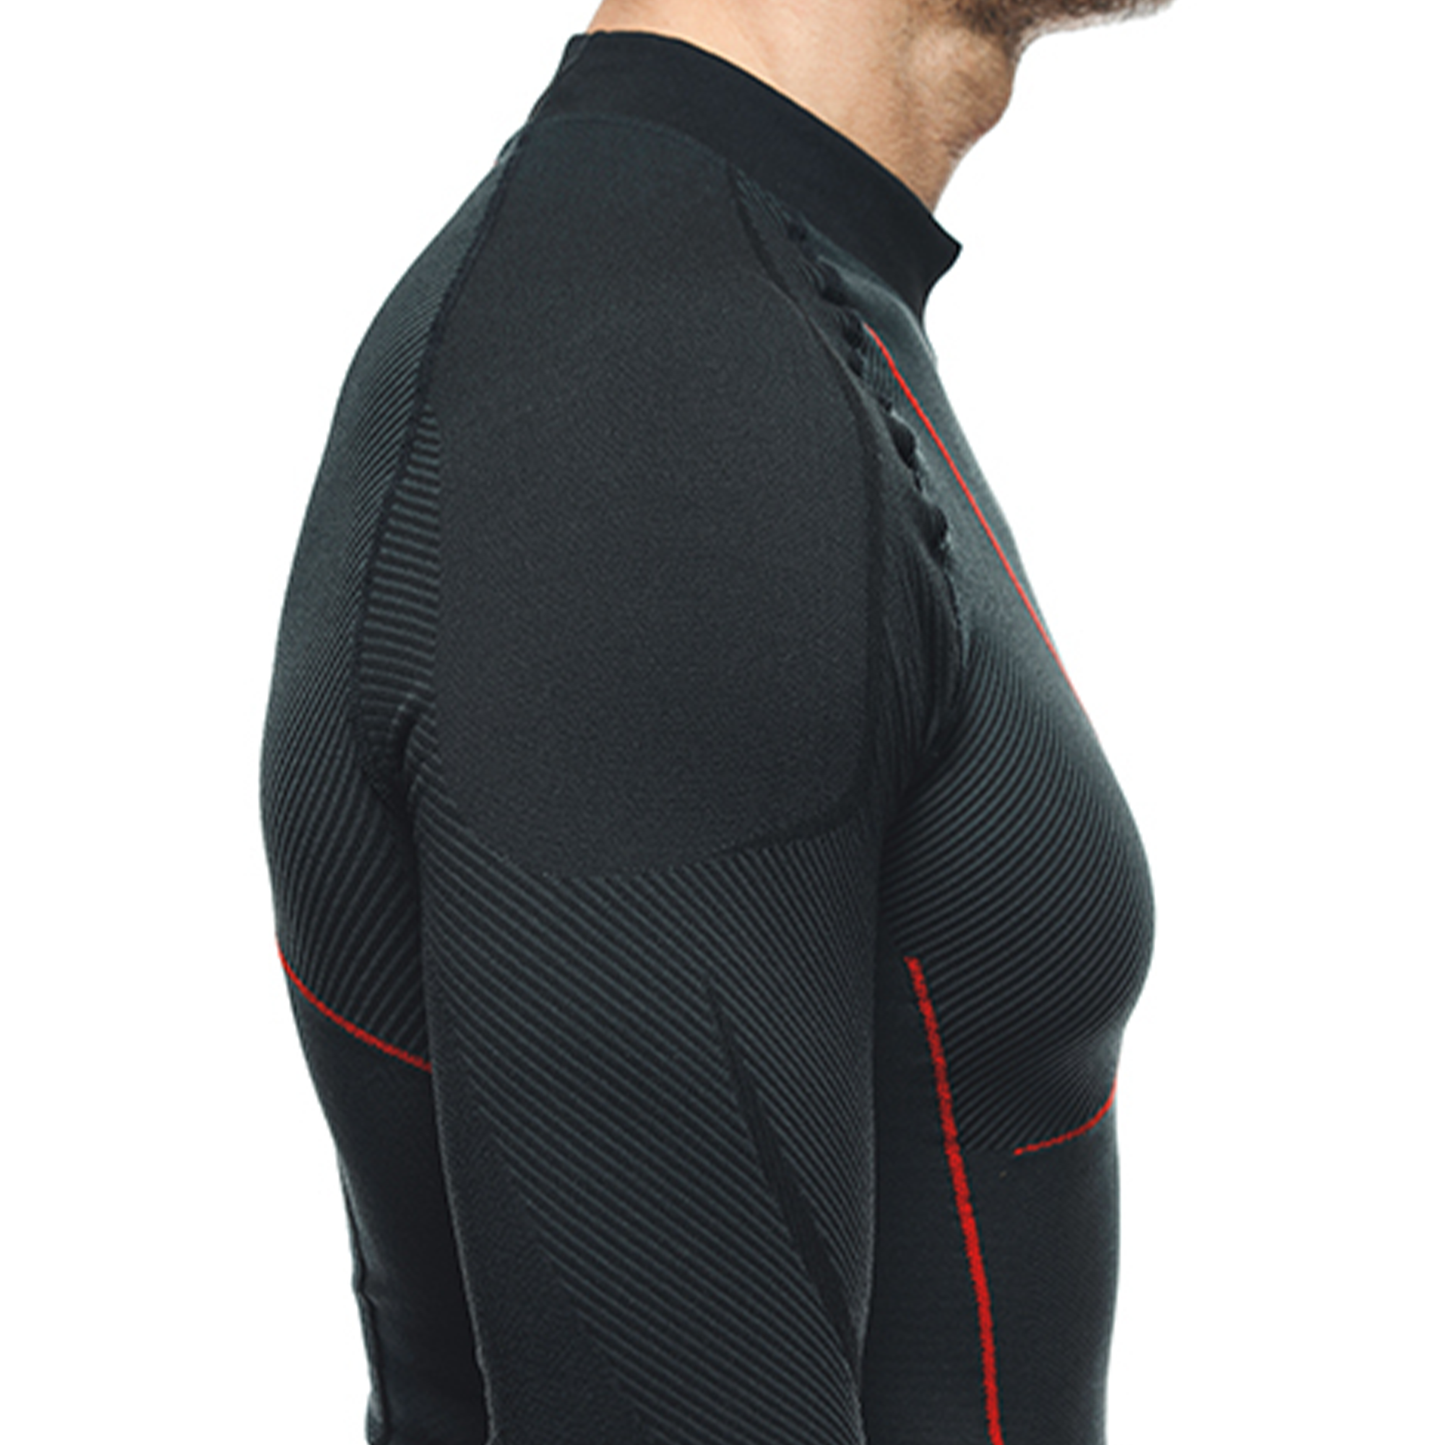 Dainese Thermo Long Sleeve - Black/Red (606)